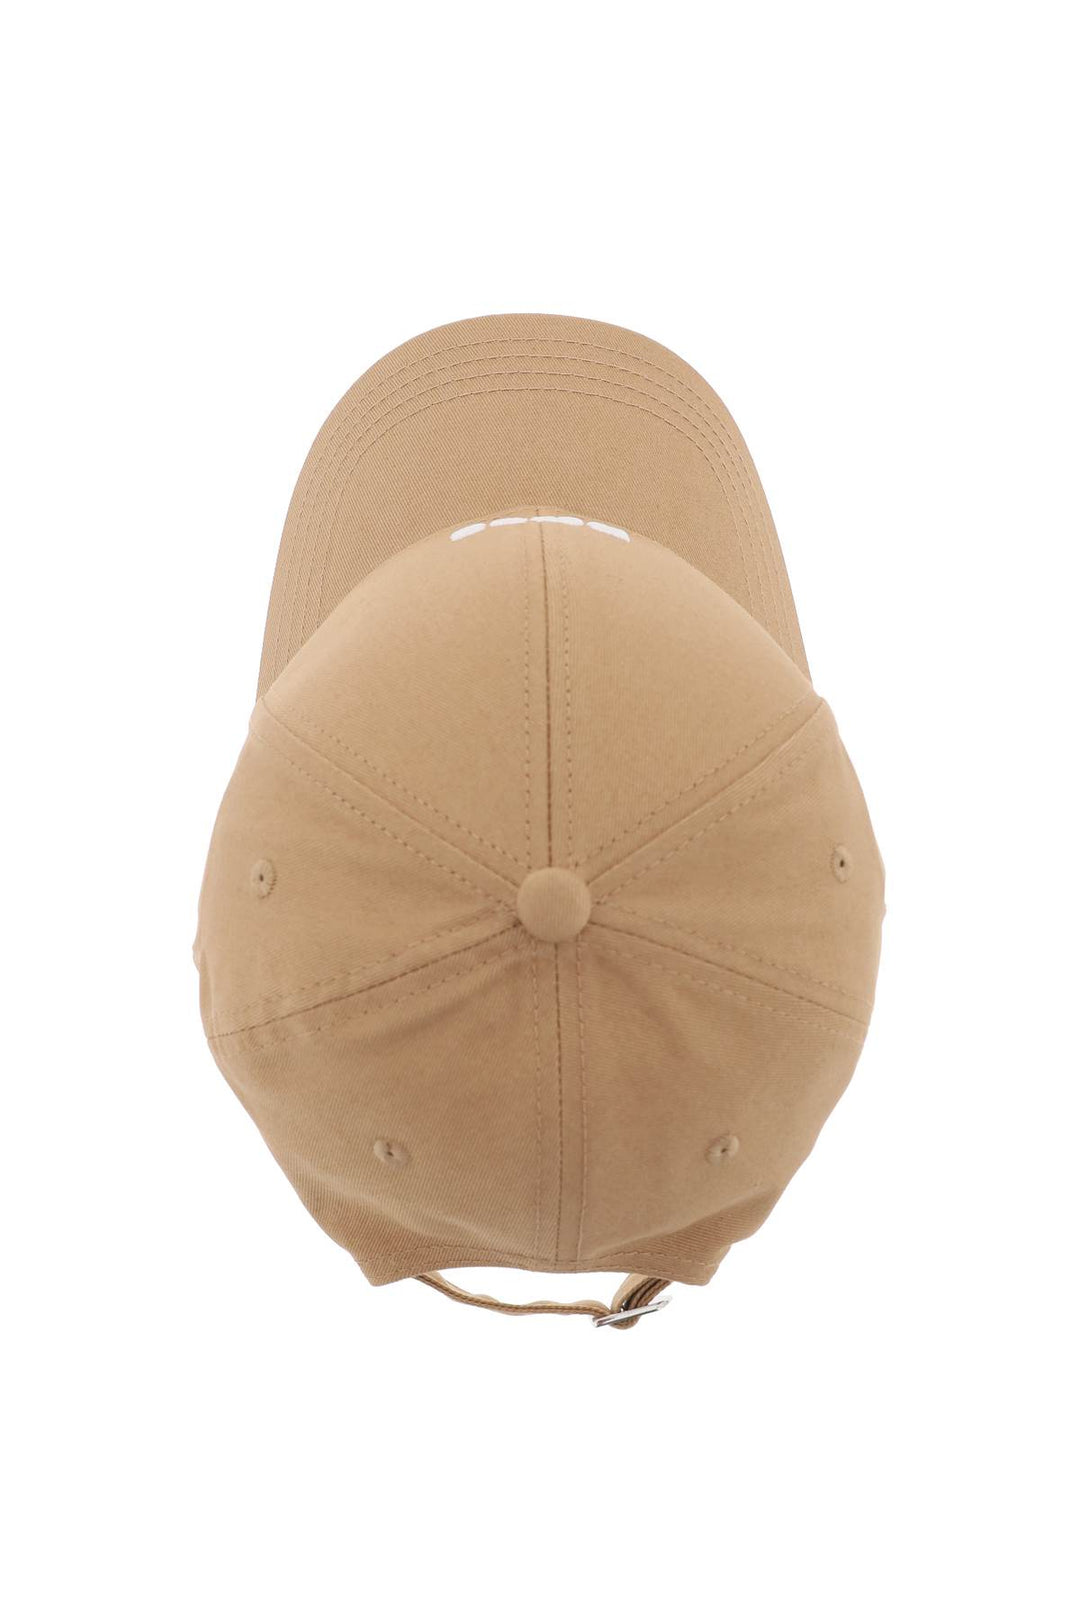 Boss Baseball Cap With Embroidered Logo   Beige